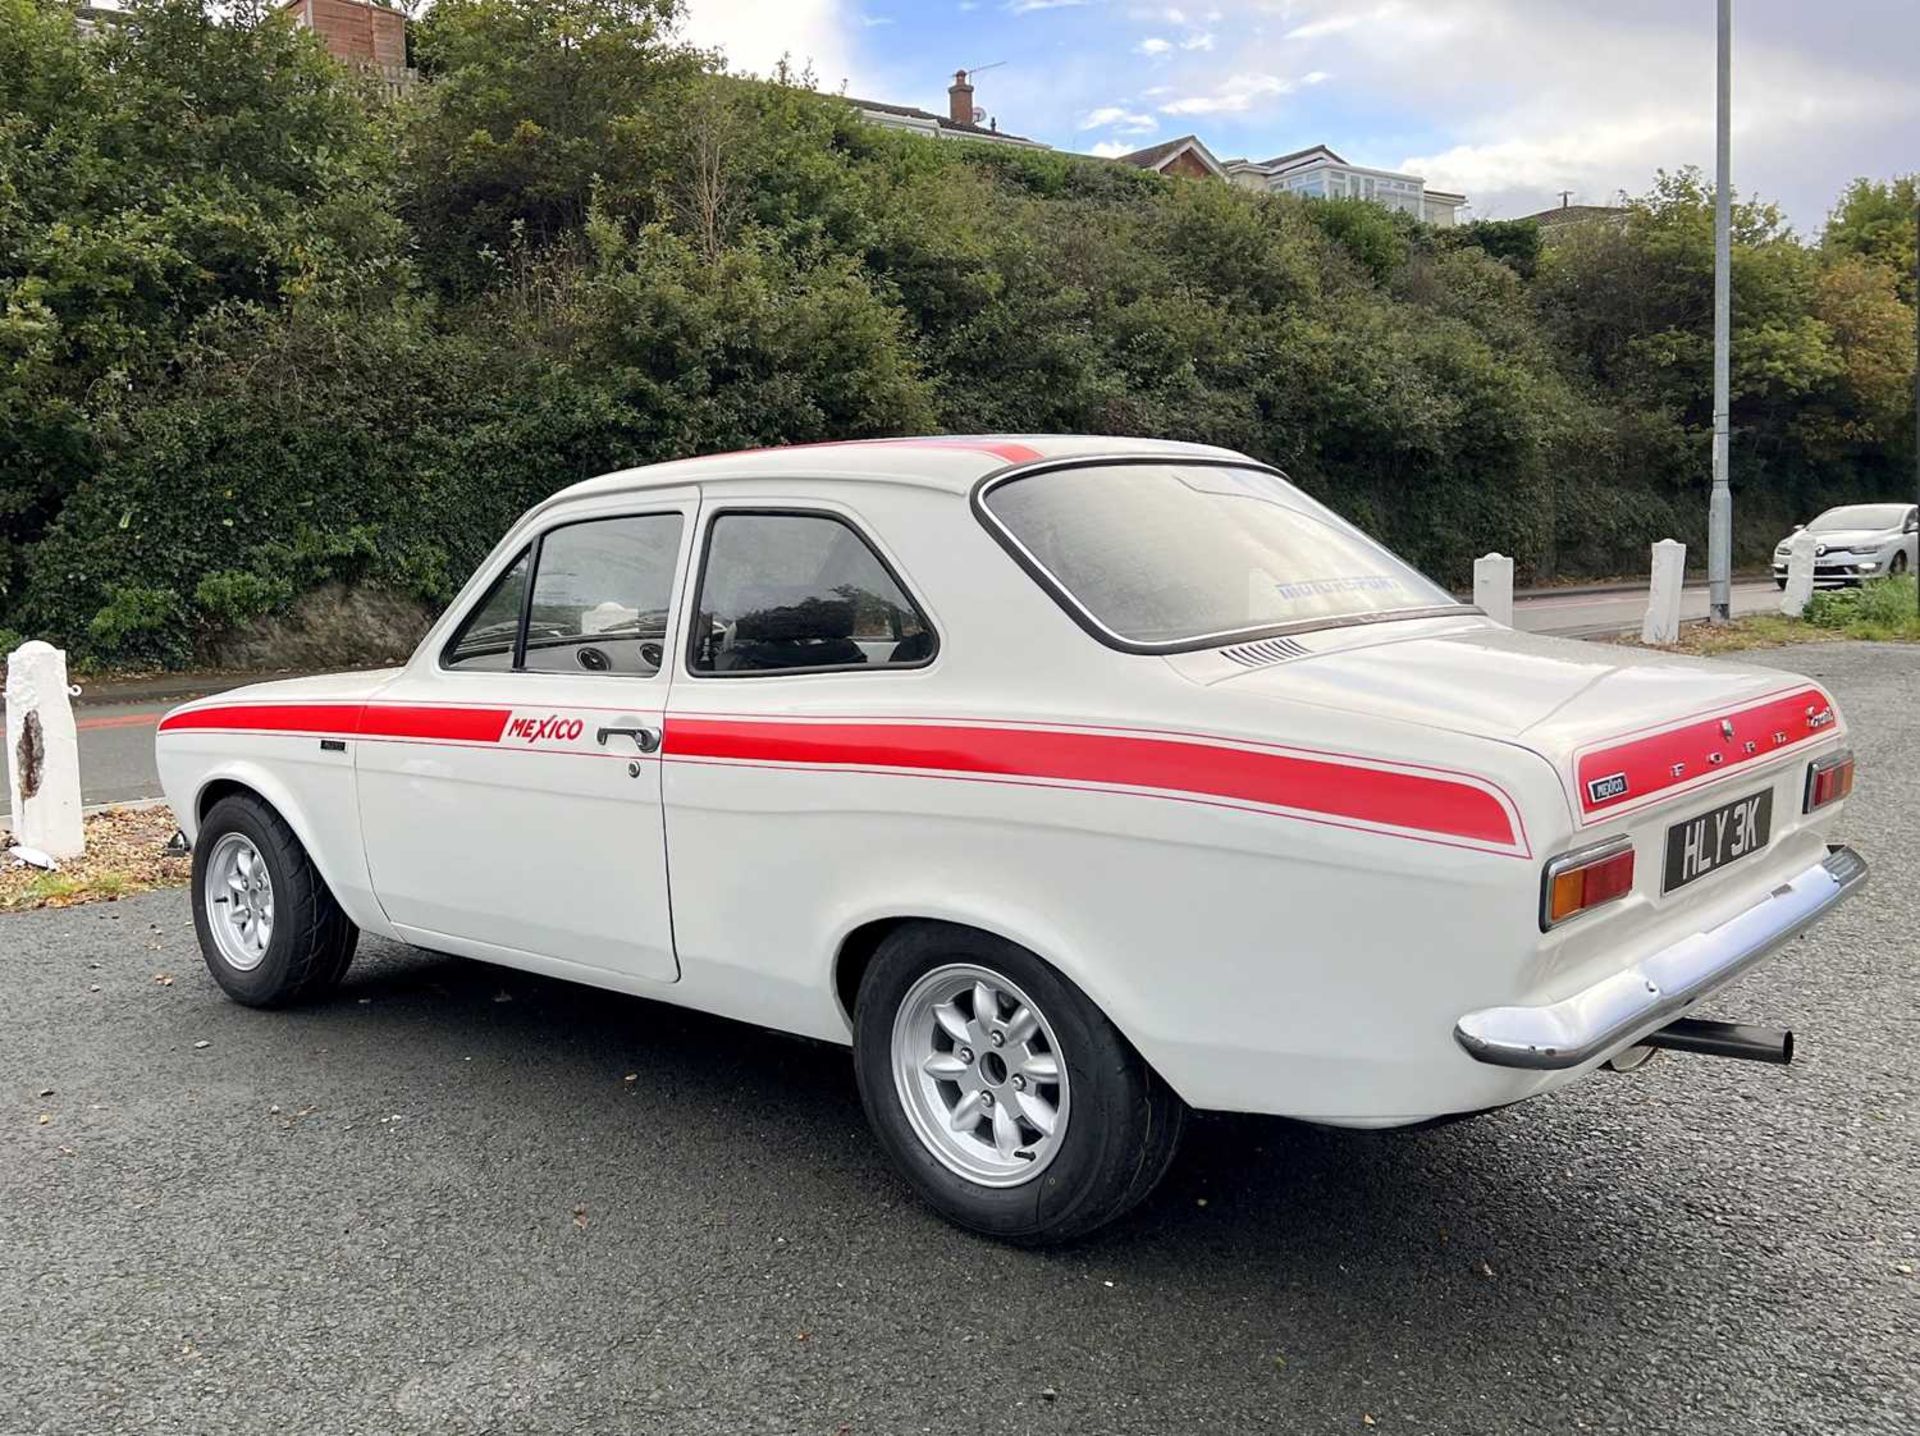 1971 Ford Escort Mexico with 2.1-litre Cosworth engine 2.1-Litre naturally aspirated Cosworth engine - Image 16 of 55